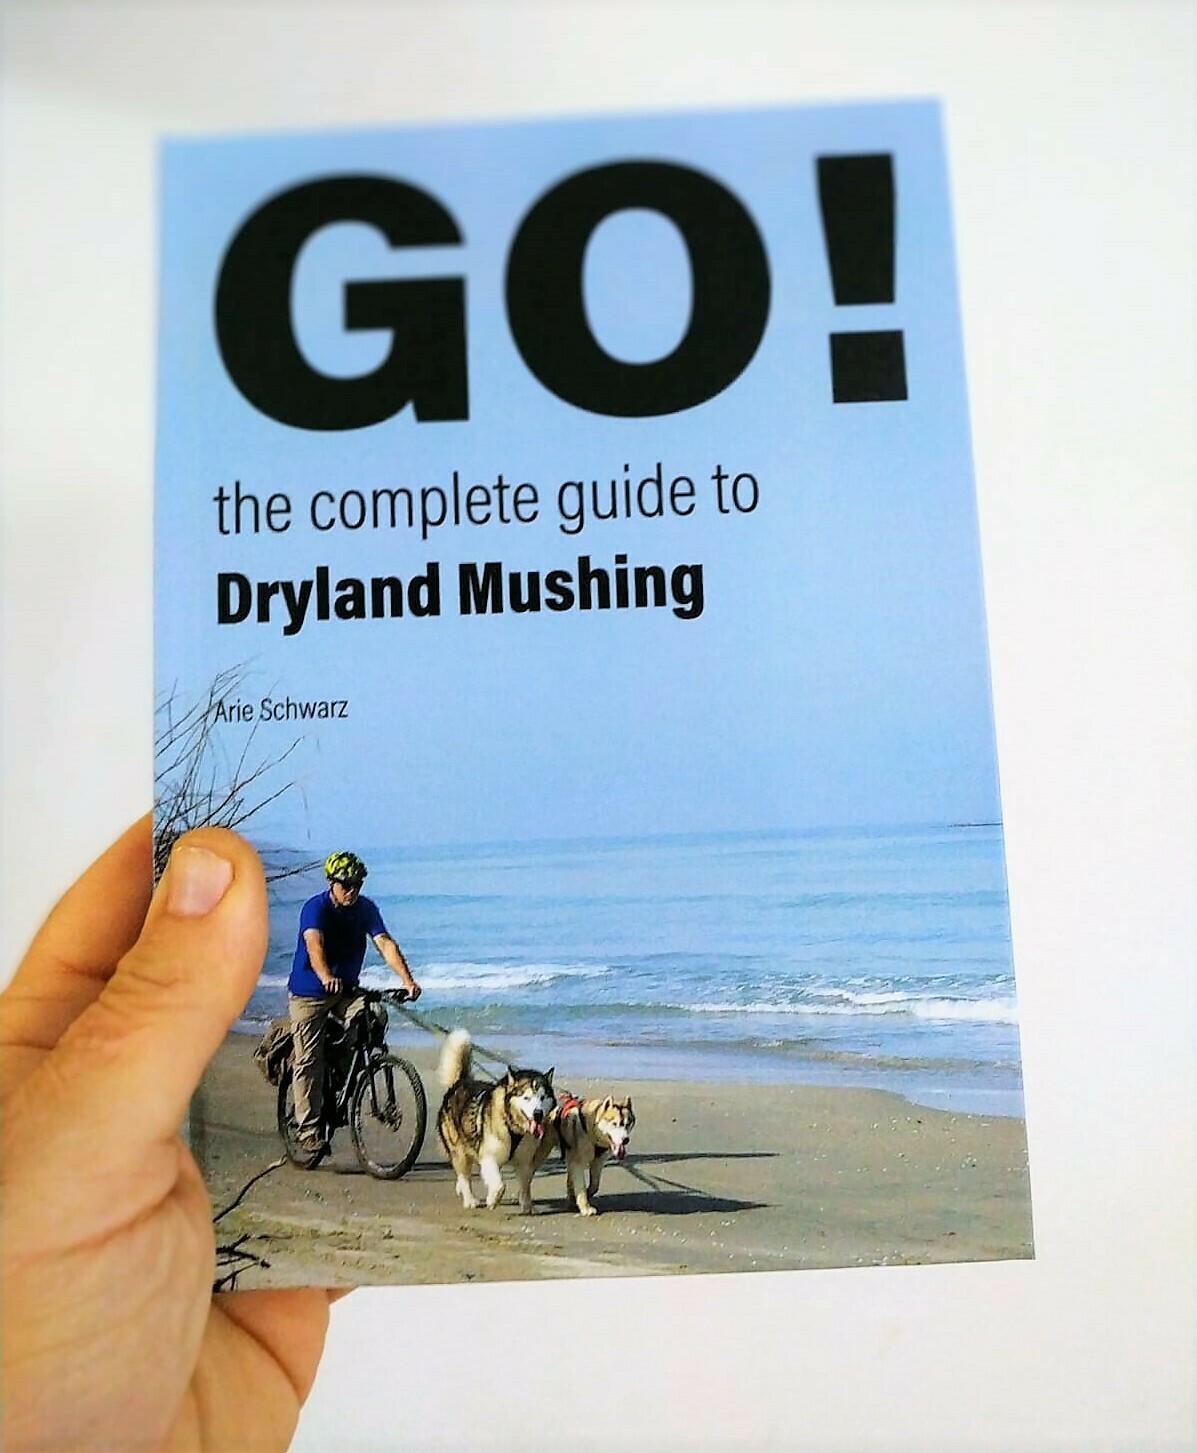 Go! the complete guide to Dryland Mushing